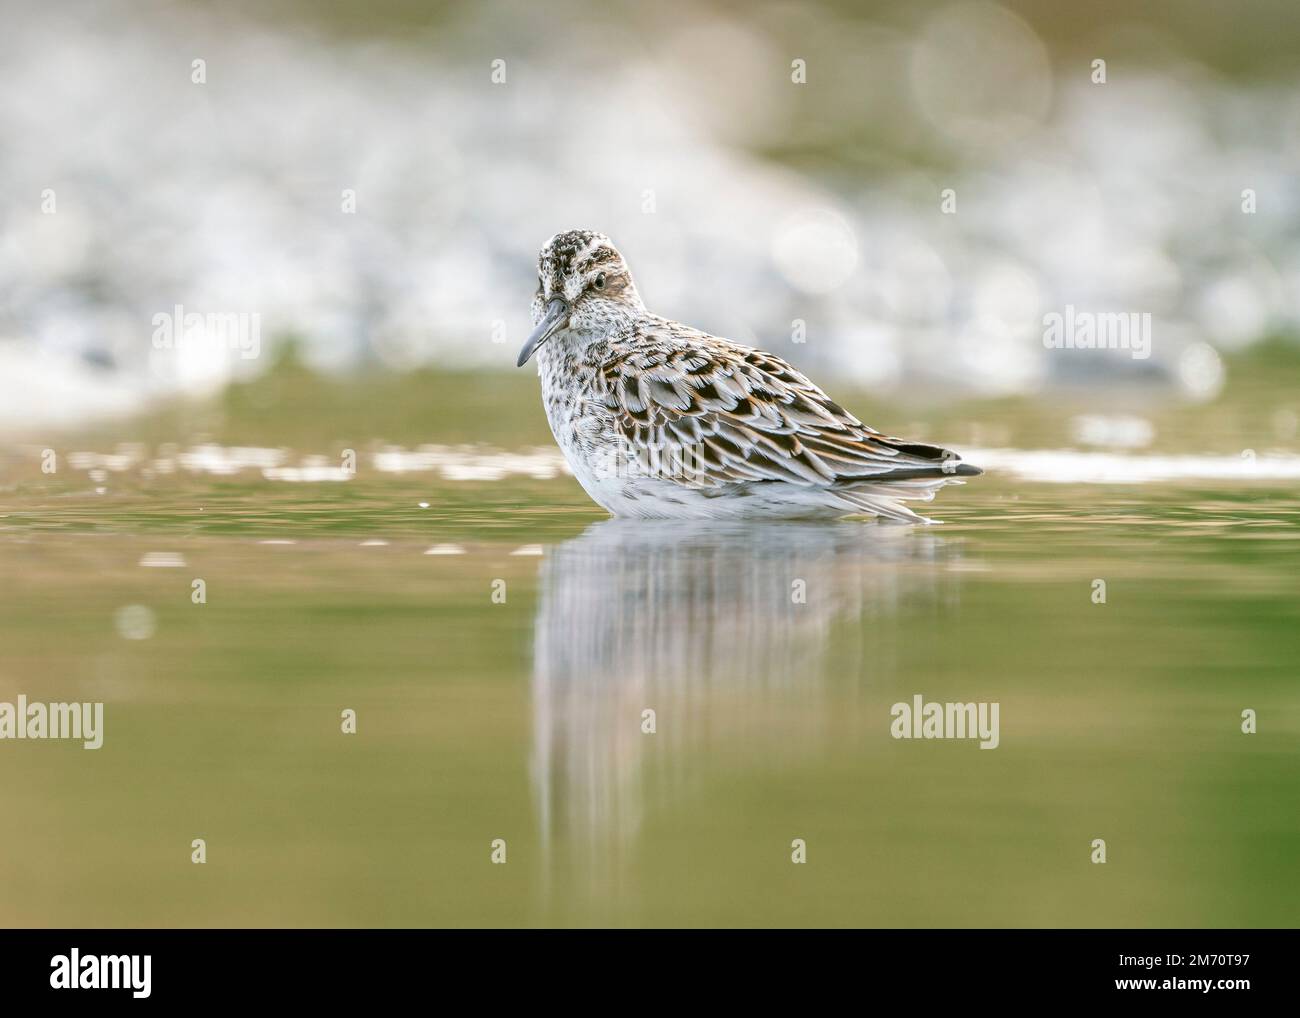 Broad-billed sandpiper (Calidris falcinellus) is a small wading bird of the Scolopacidae family. Broad-billed sandpiper in a typical biotope on the sh Stock Photo